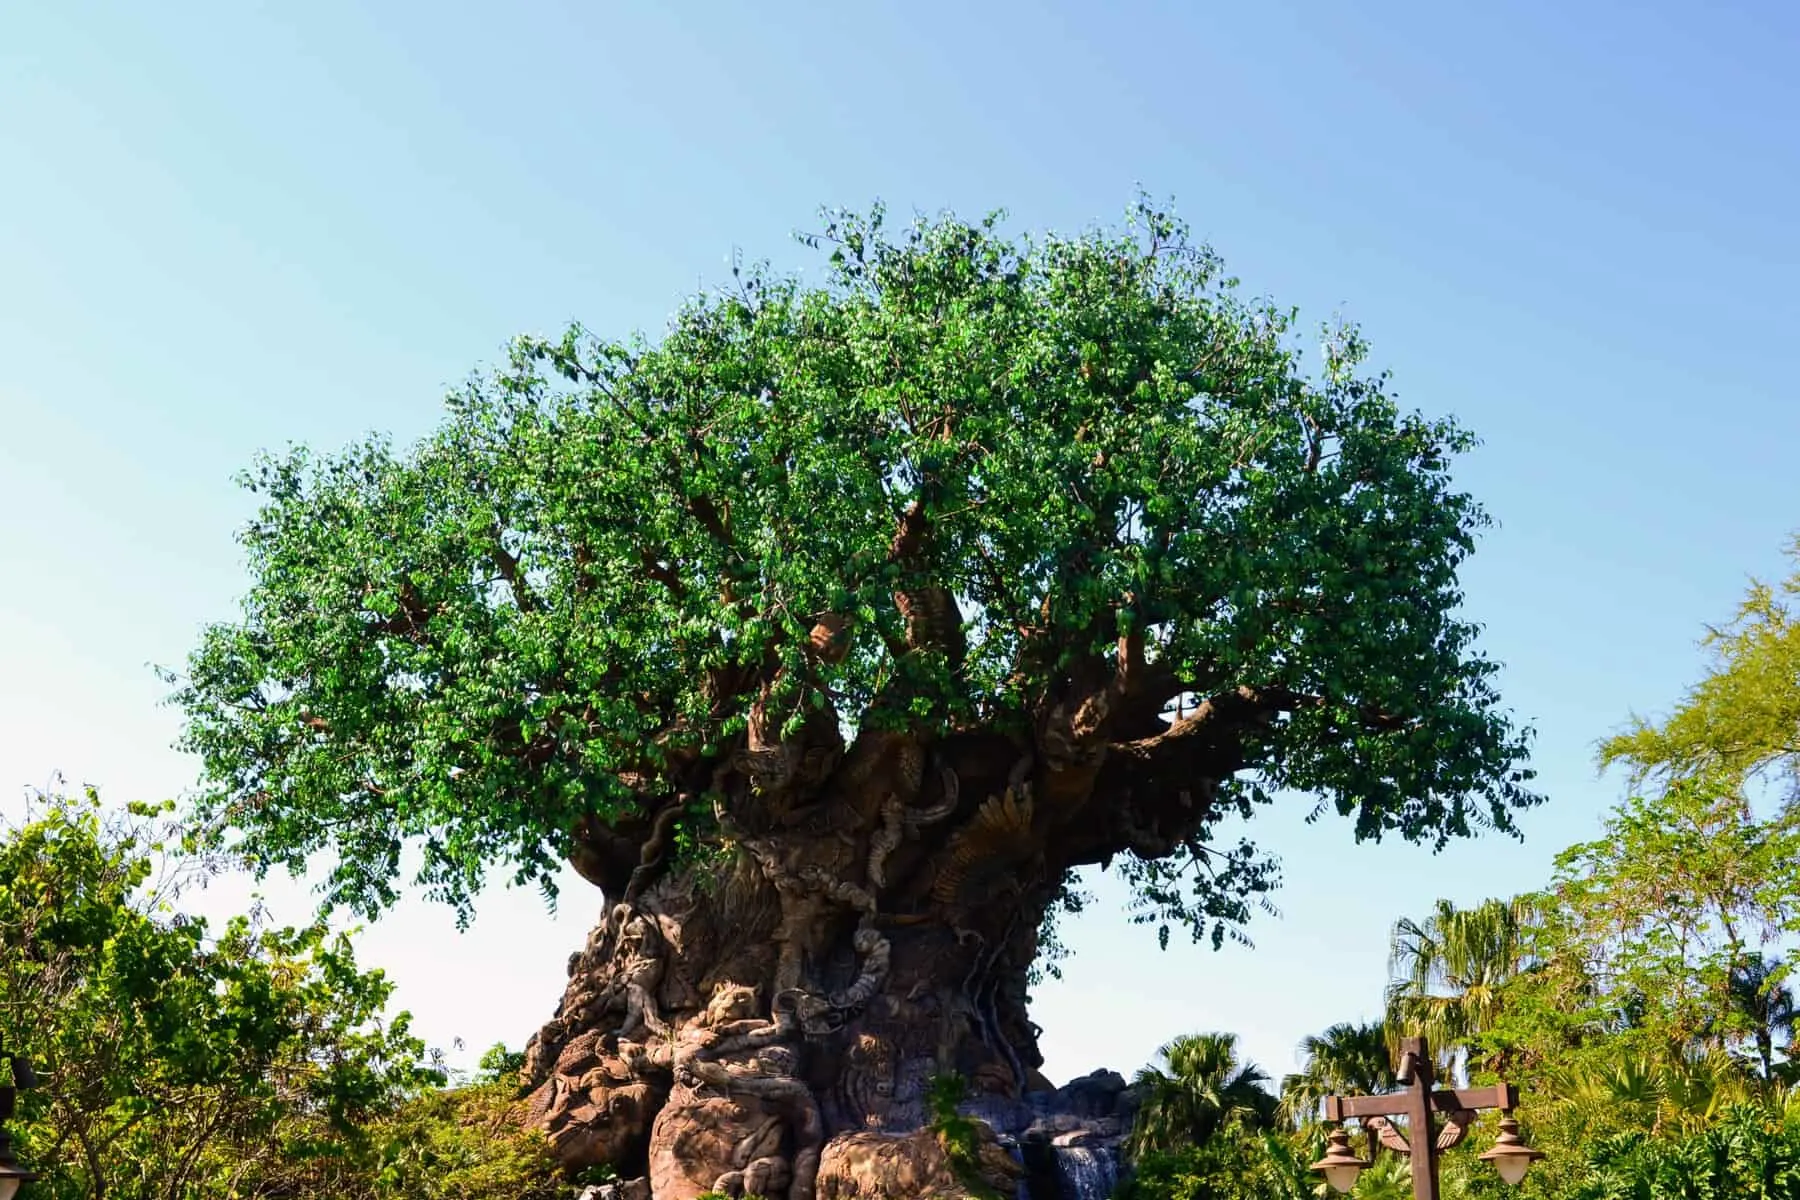 Complete Guide to Animal Kingdom at Disney World